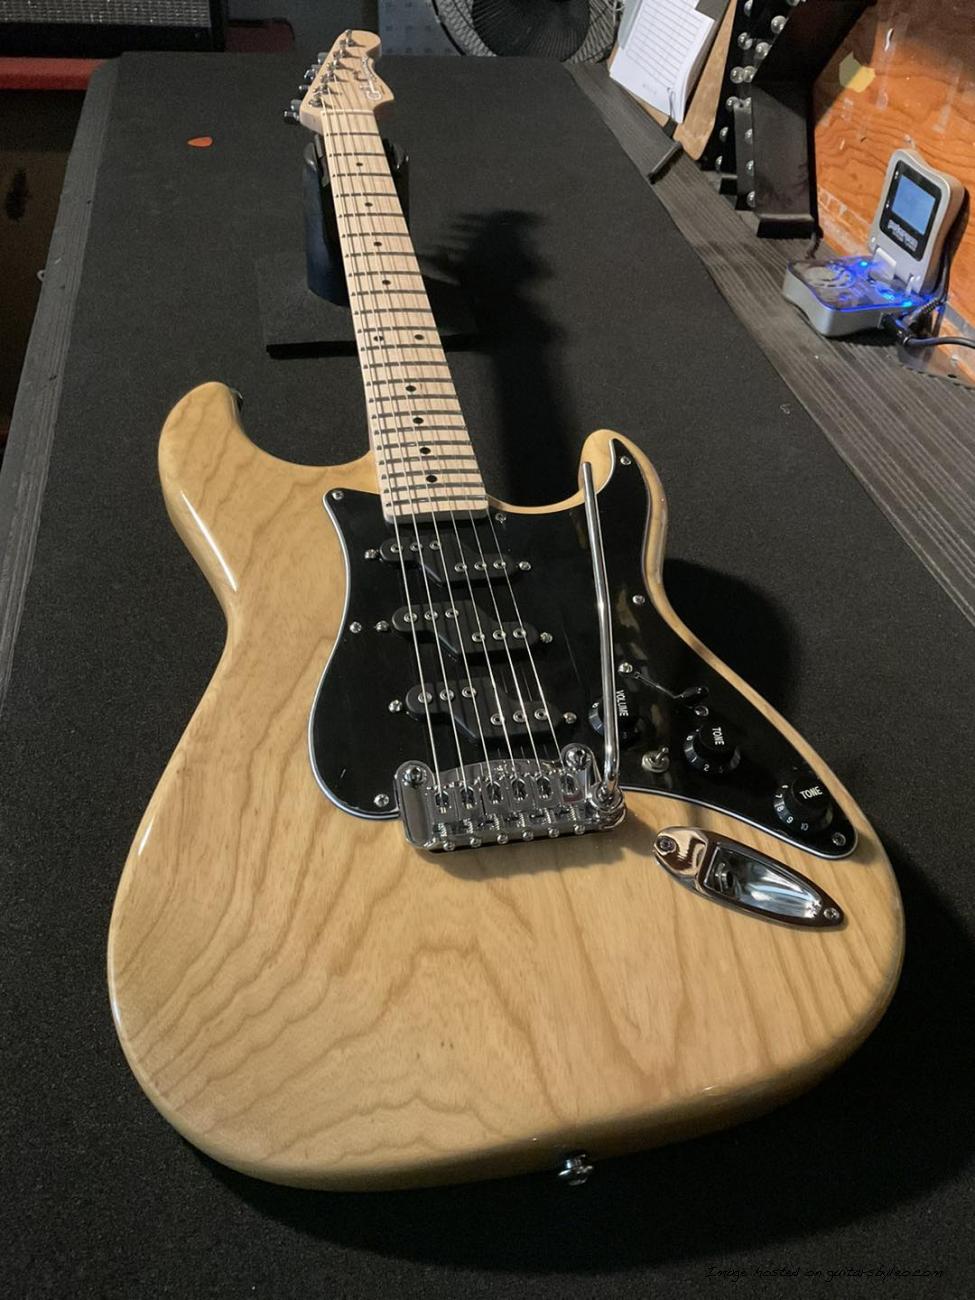 Fullerton Deluxe Comanche in Vintage Natural over swamp ash